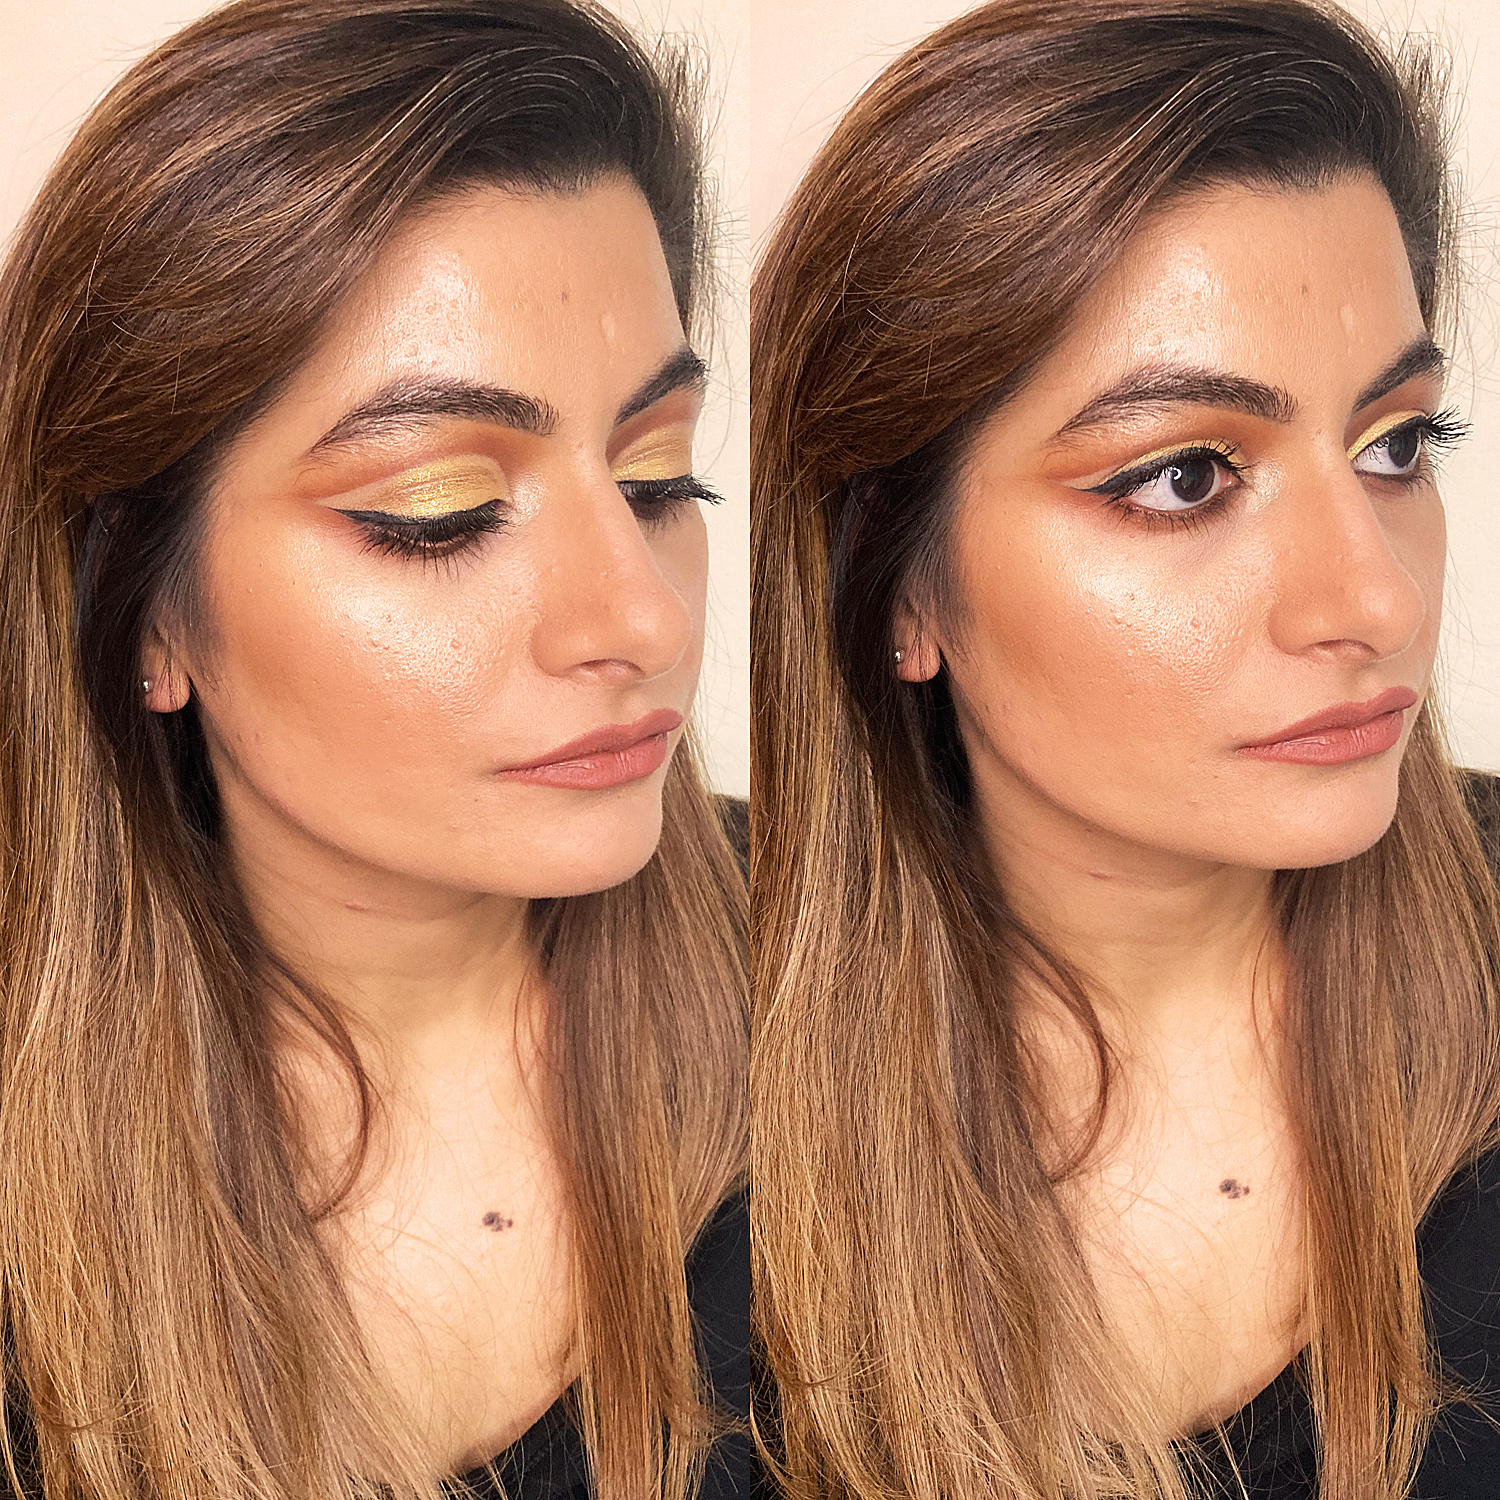 FOTD #4 - My First Ever Cut Crease! (1)